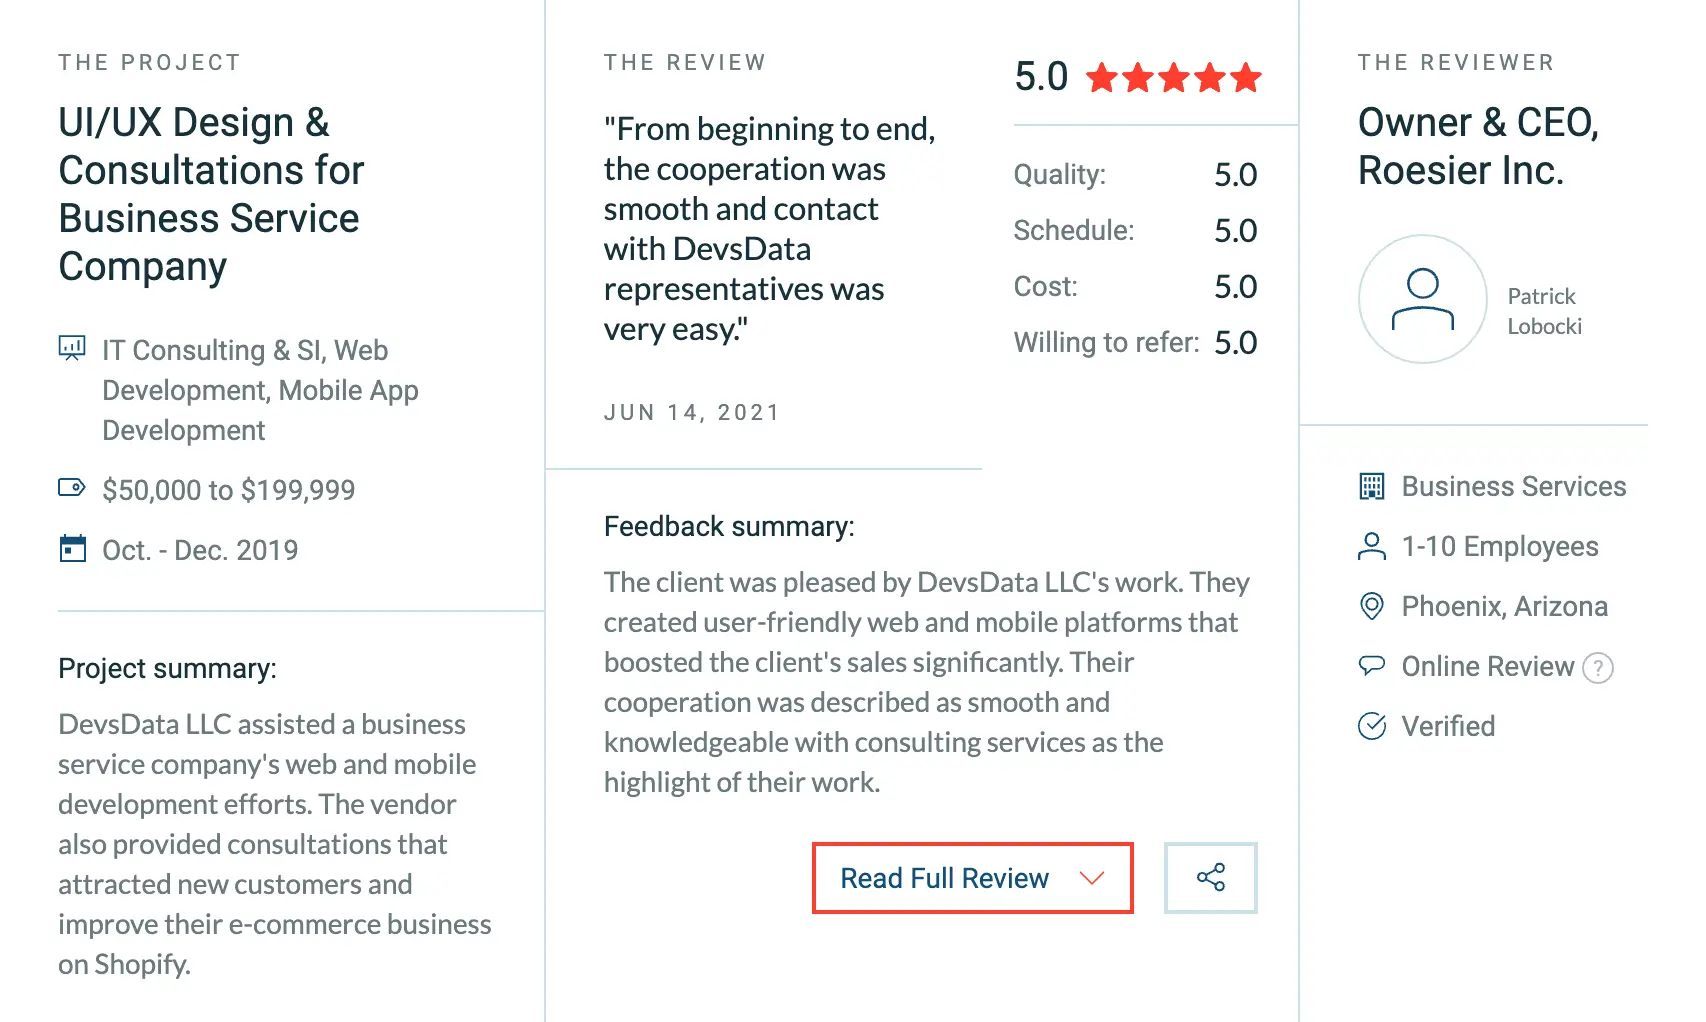 DevsData LLC's New Five Star Rating Review on Clutch for UI/UX Design Consultation Project thumbnail